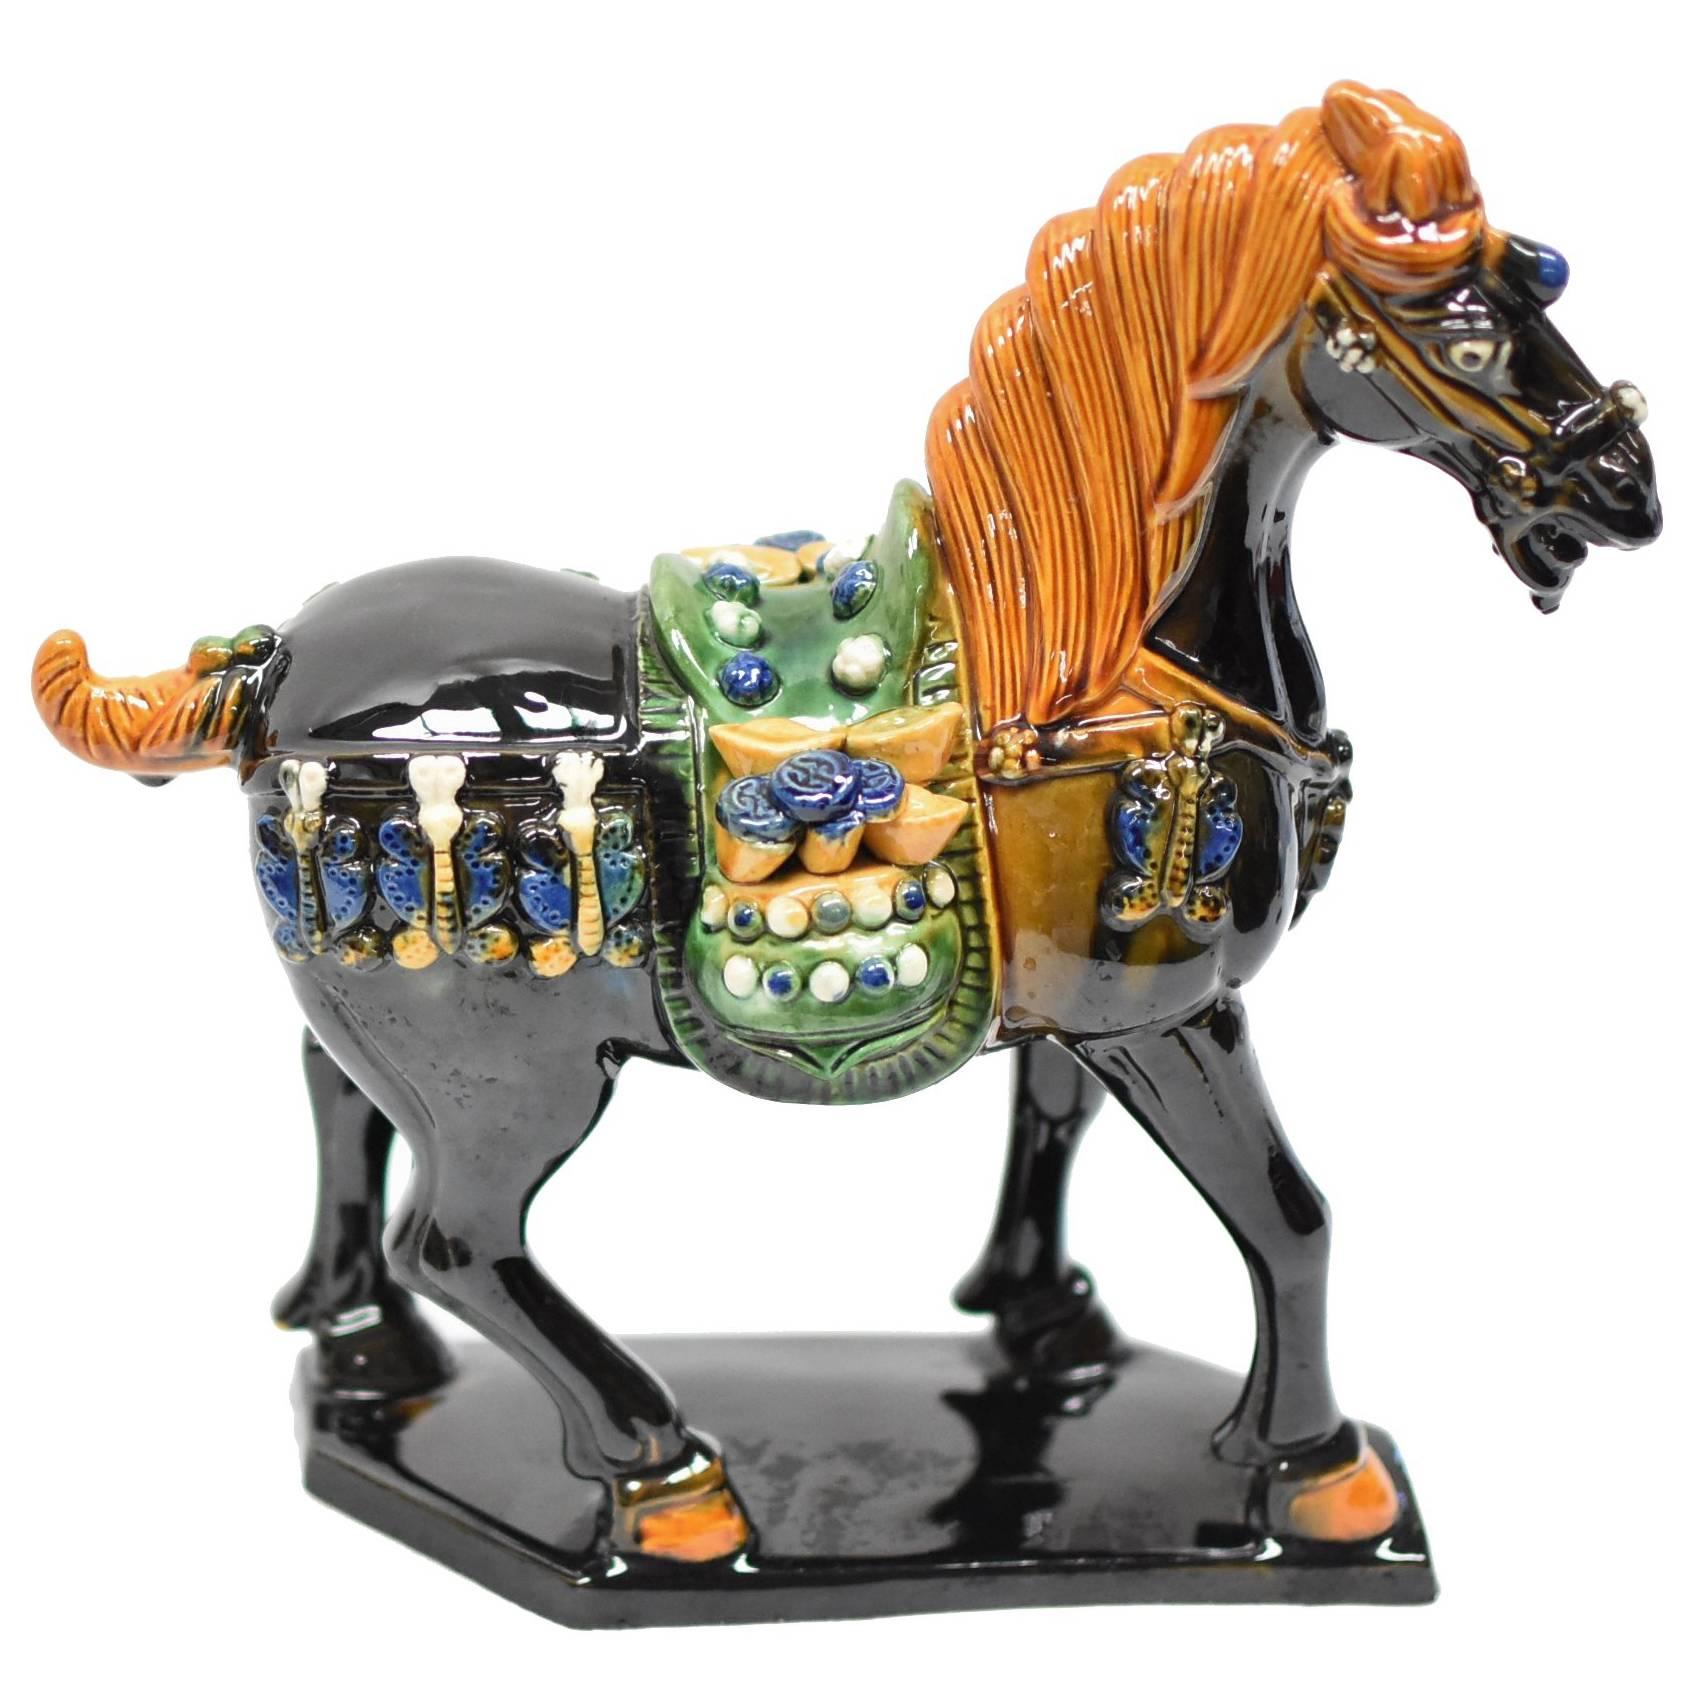 Black Chinese Pottery Horse, with Money Bag